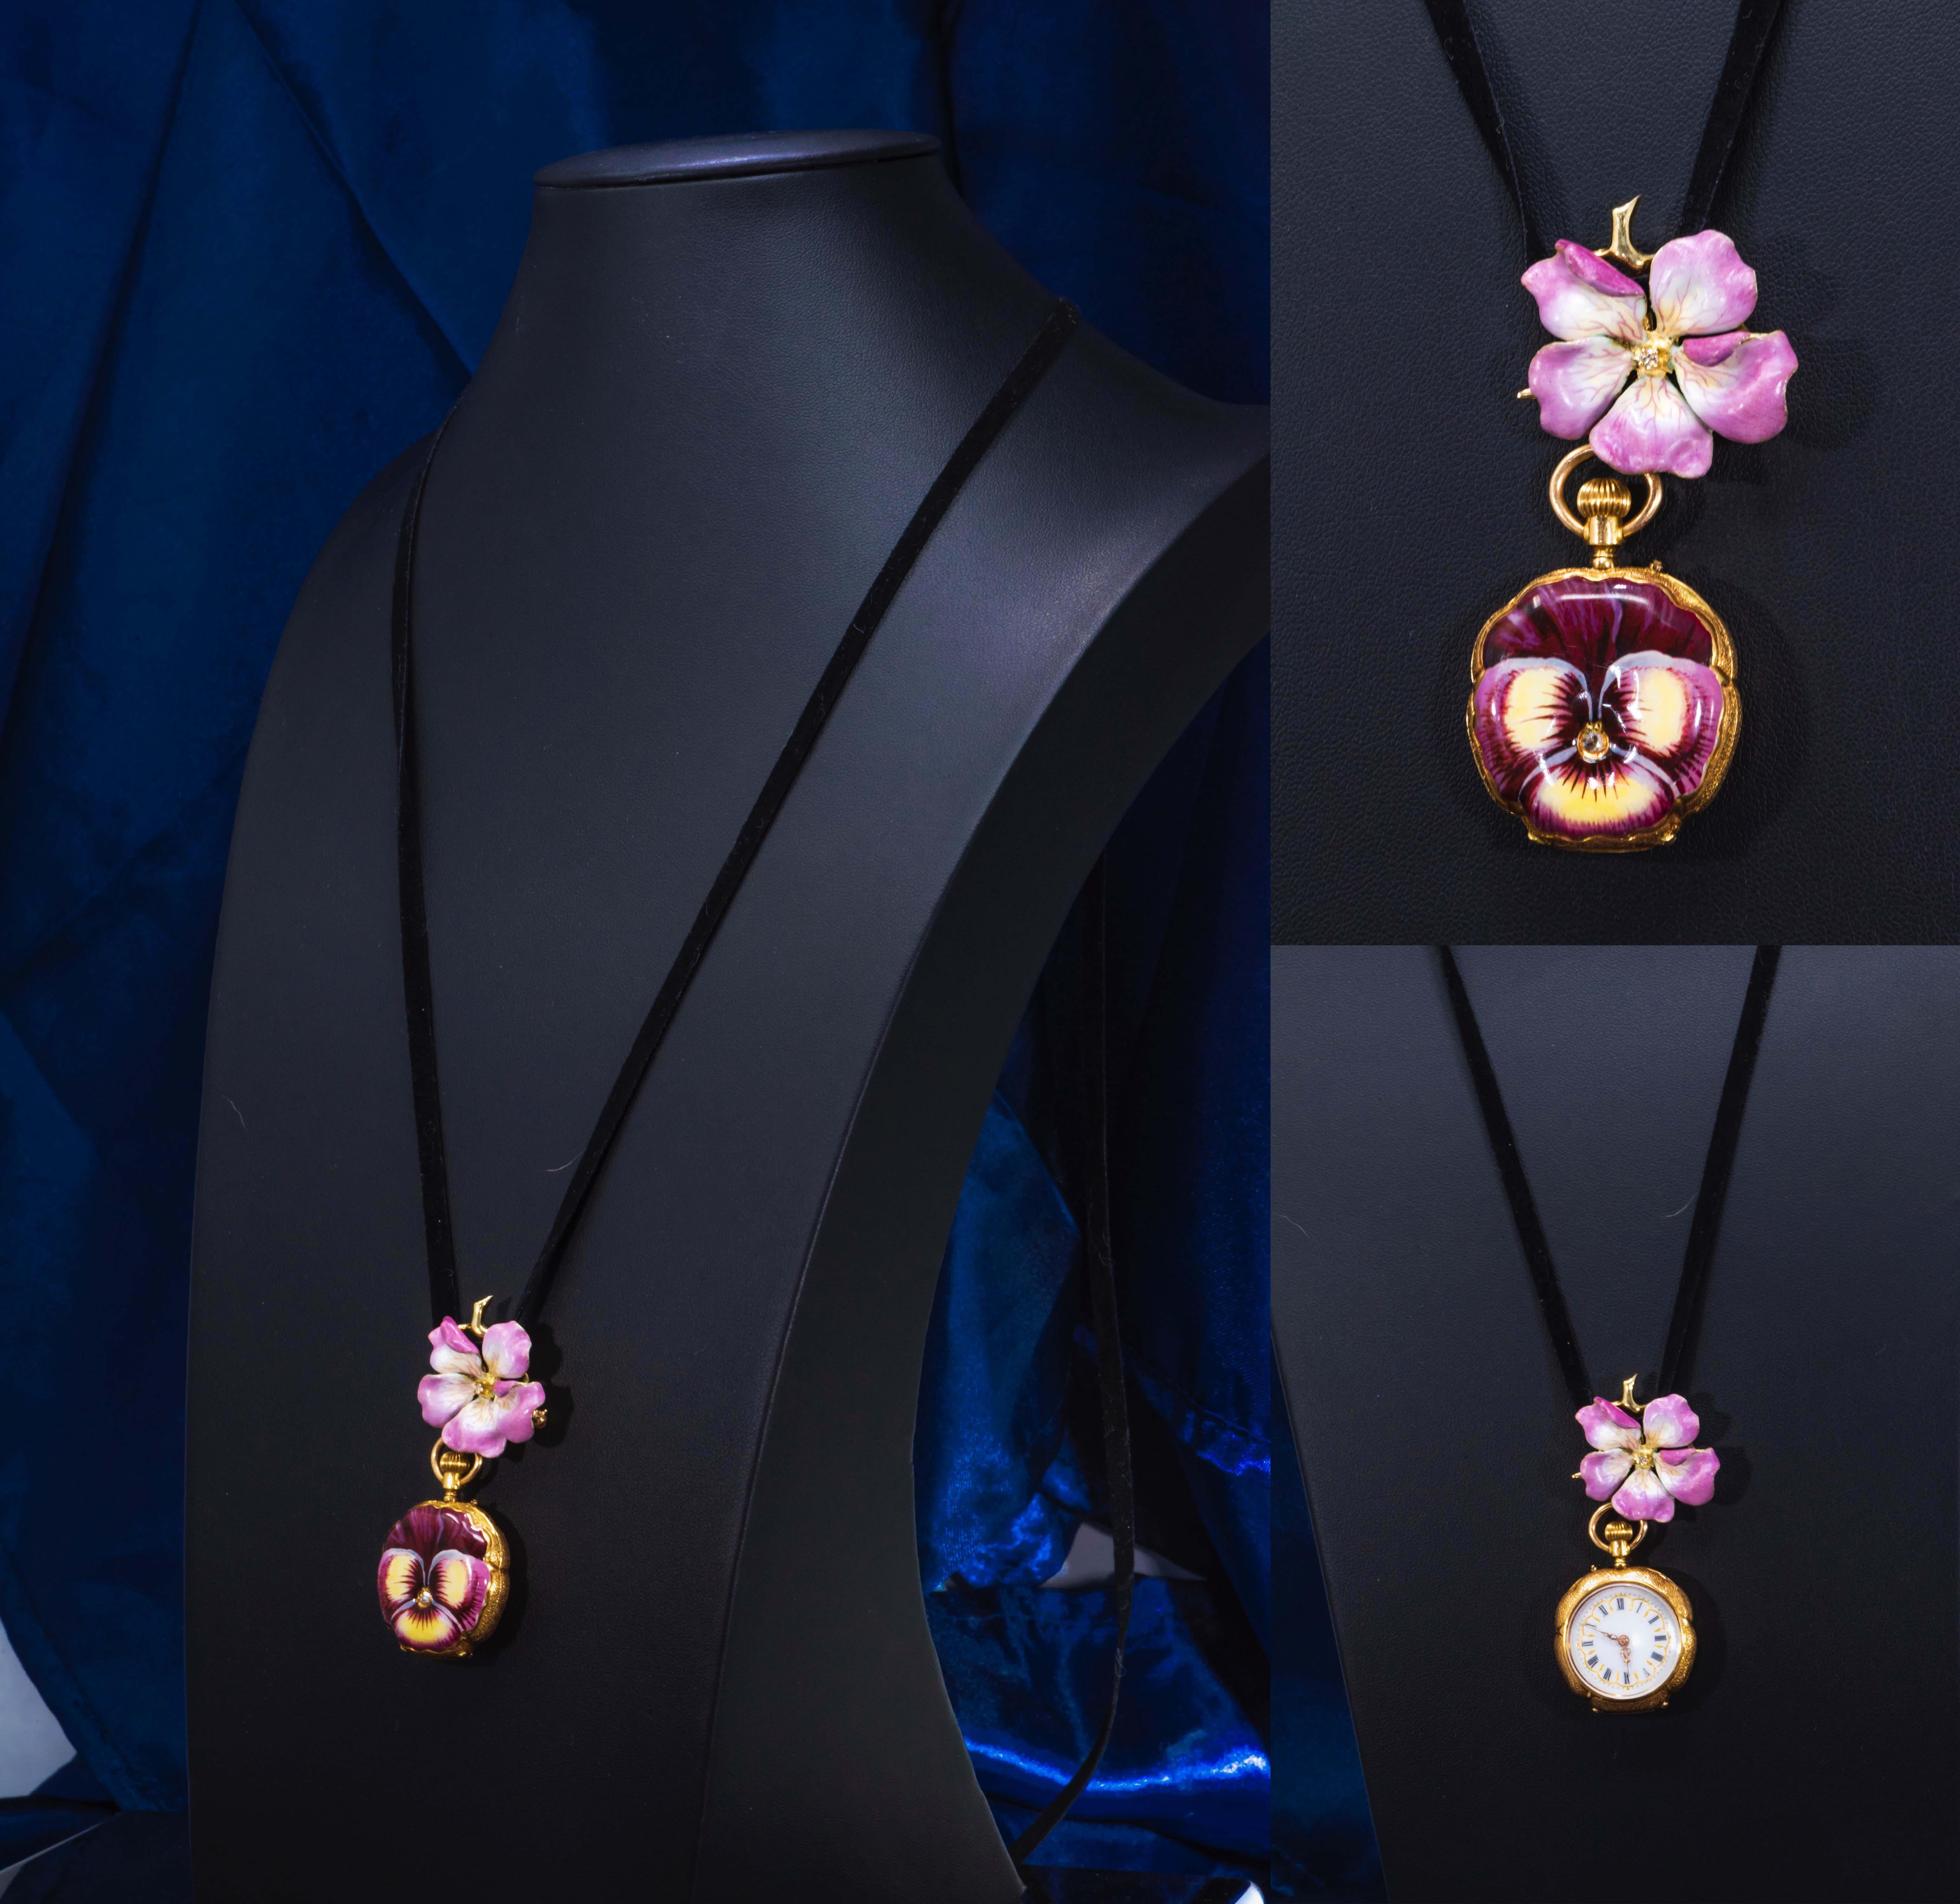 Dimensions Styled as Necklace :
60 mm drop from top to bottom 

Dimensions Styled as a Brooch / Pin only 
20mm tall  x 30mm wide 

Dimensions Styled as Necklace Timepiece only :
40mm tall x 28mm wide

Interchangeable and Can be fashioned in 4